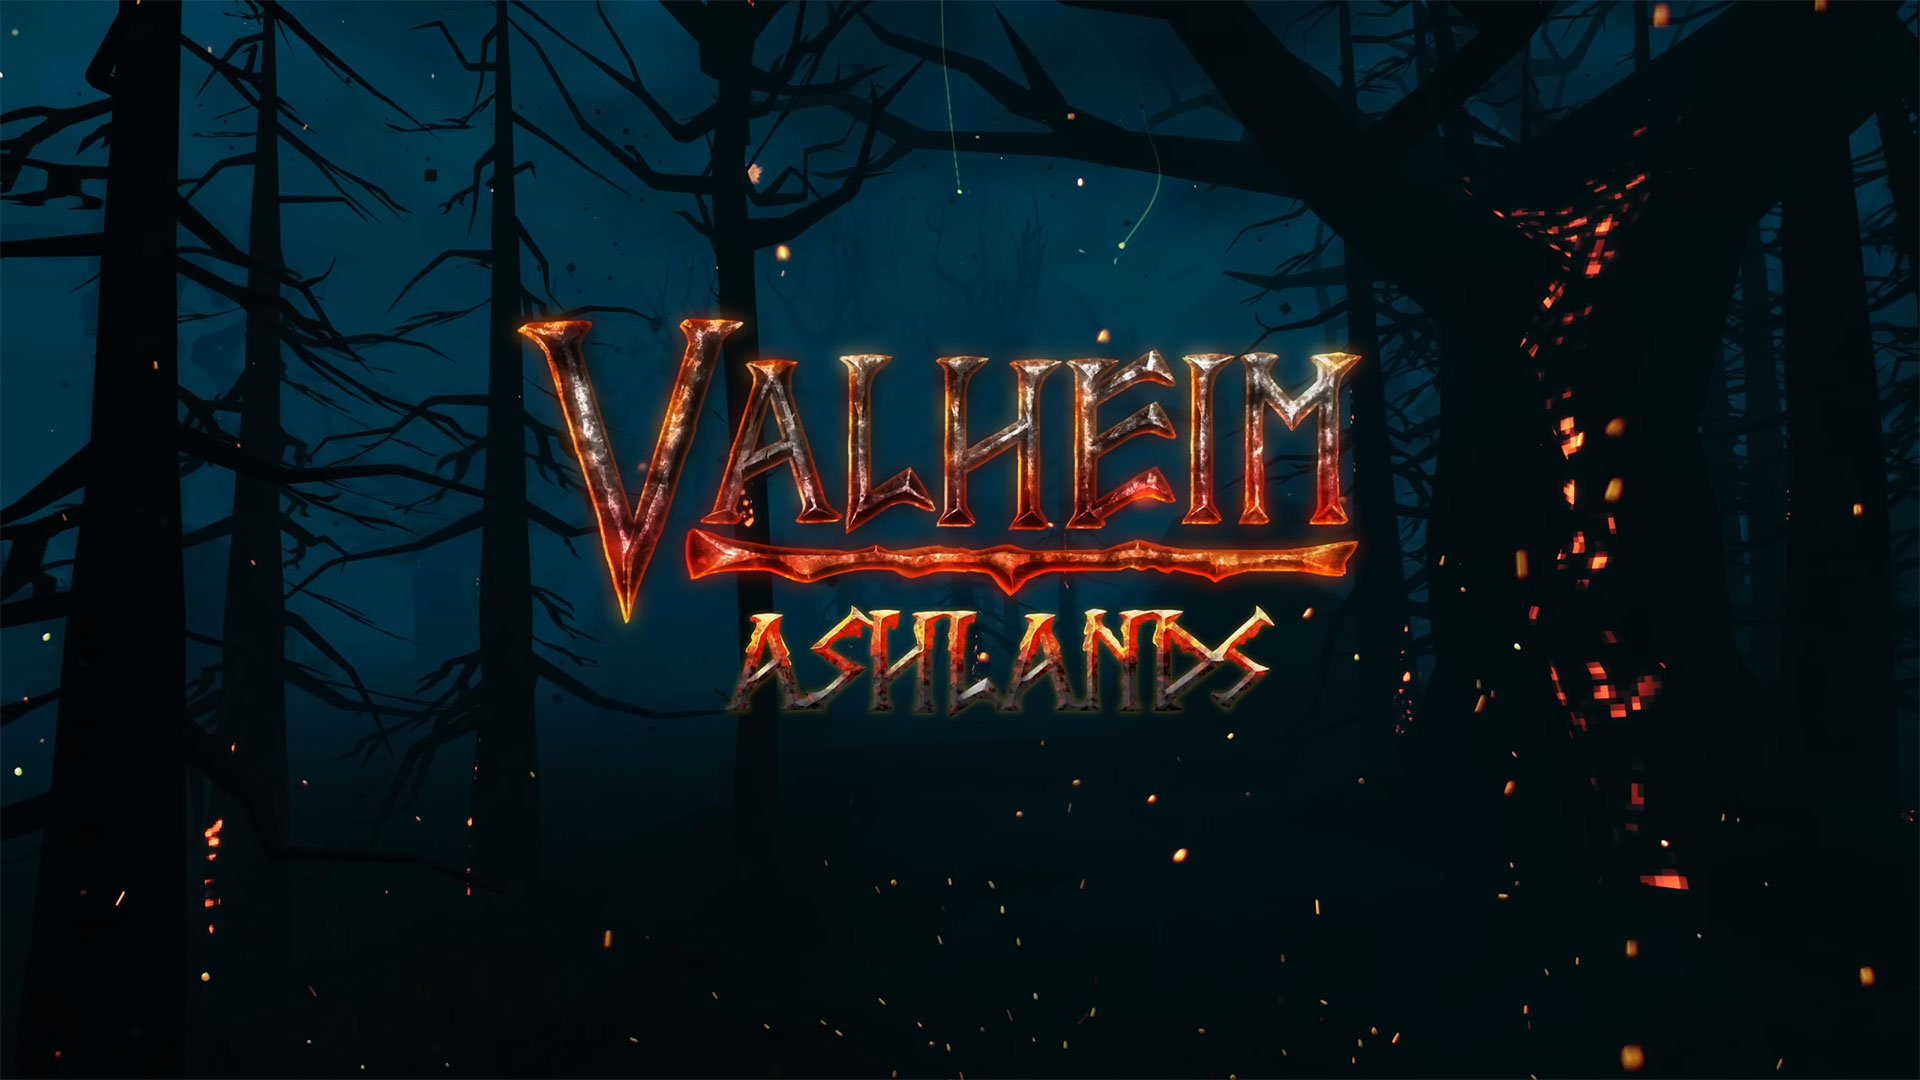 Valheim: Ashlands is now available for public testing